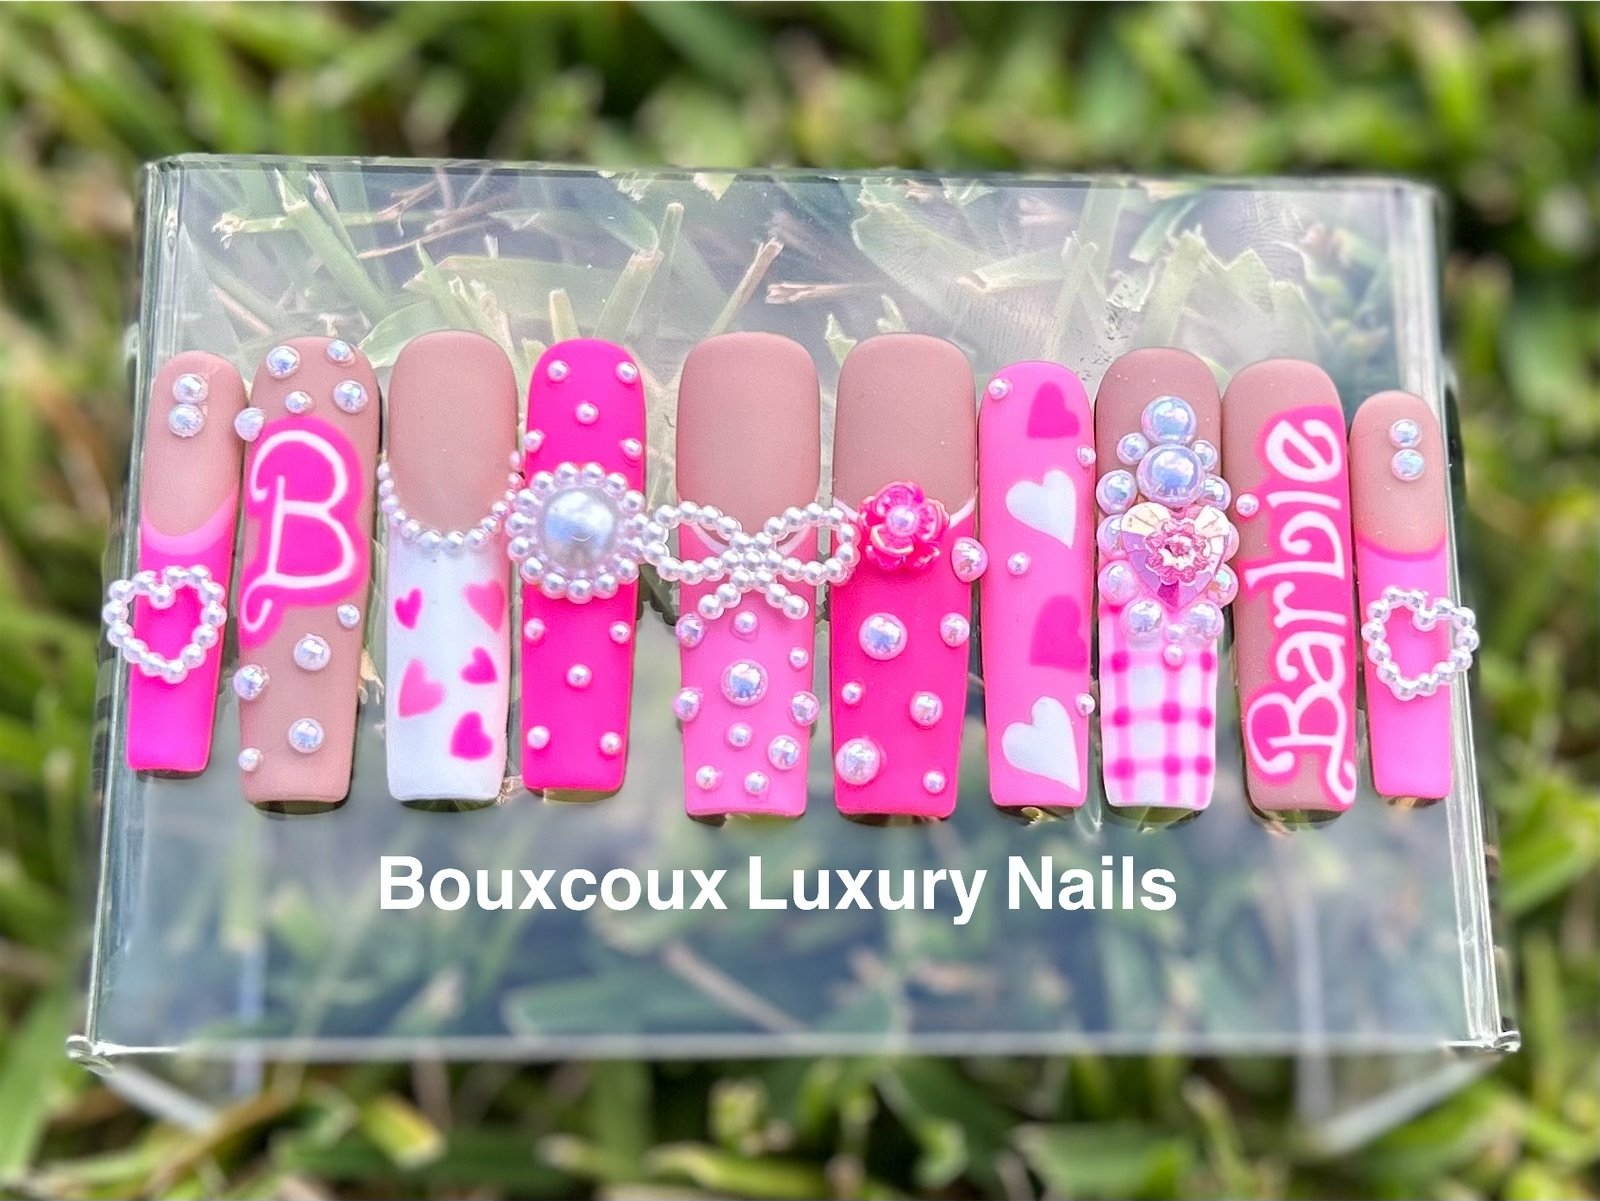 Home | Bouxcoux Luxury Nails